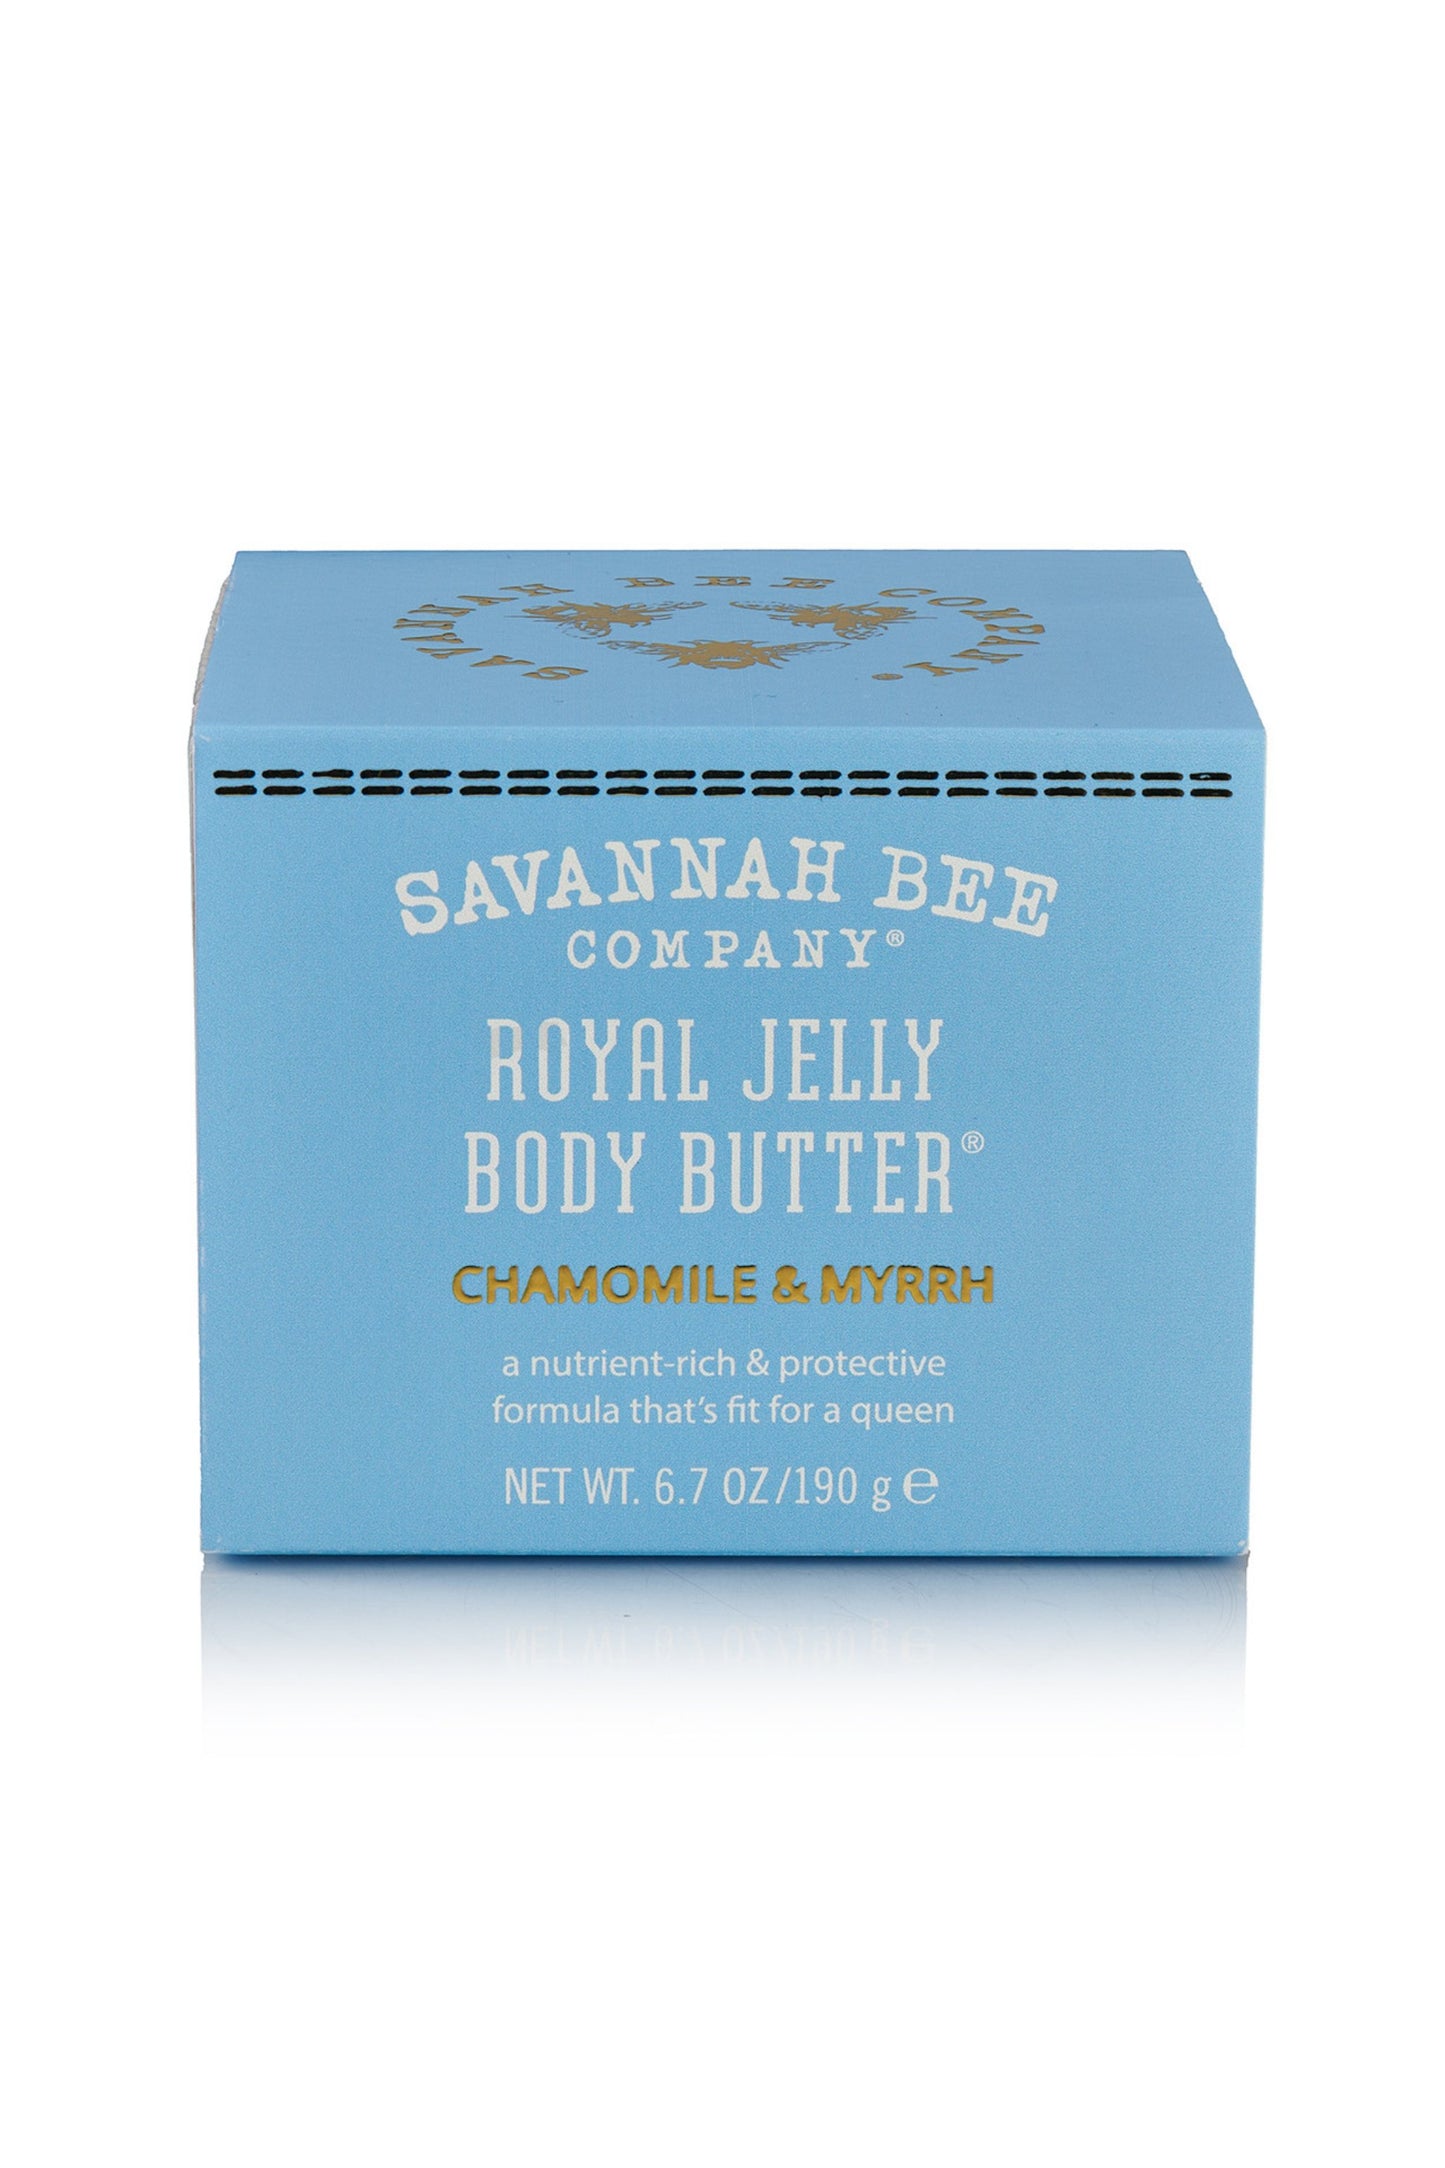 Royal Jelly Body Butter Chamomile & Myrrh in a 6.7 oz.  packaging